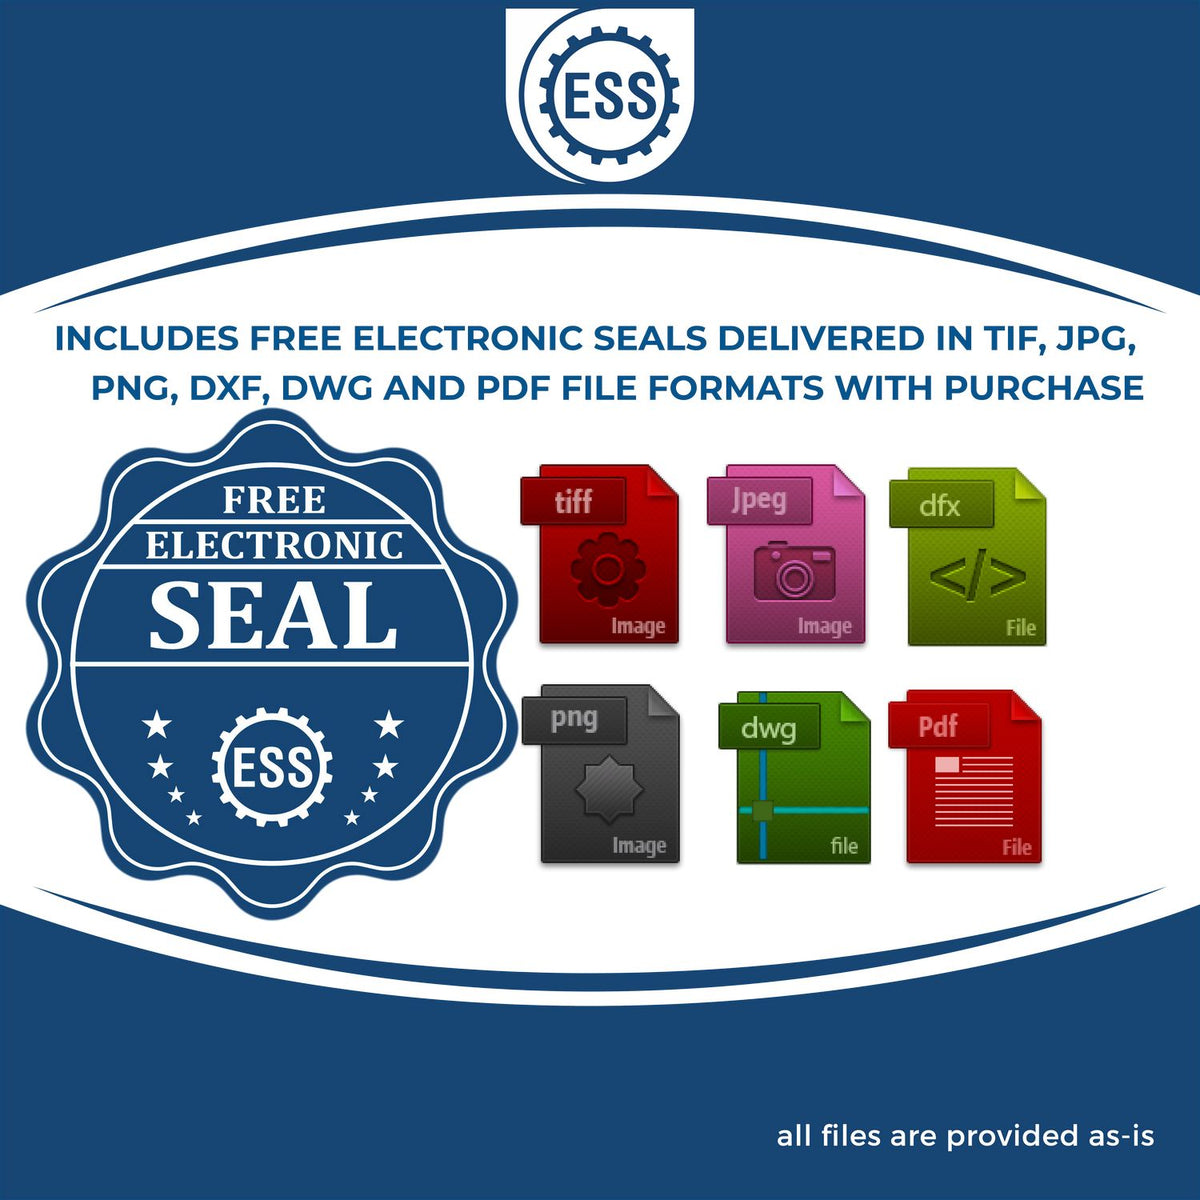 An infographic for the free electronic seal for the Kansas Engineer Desk Seal illustrating the different file type icons such as DXF, DWG, TIF, JPG and PNG.